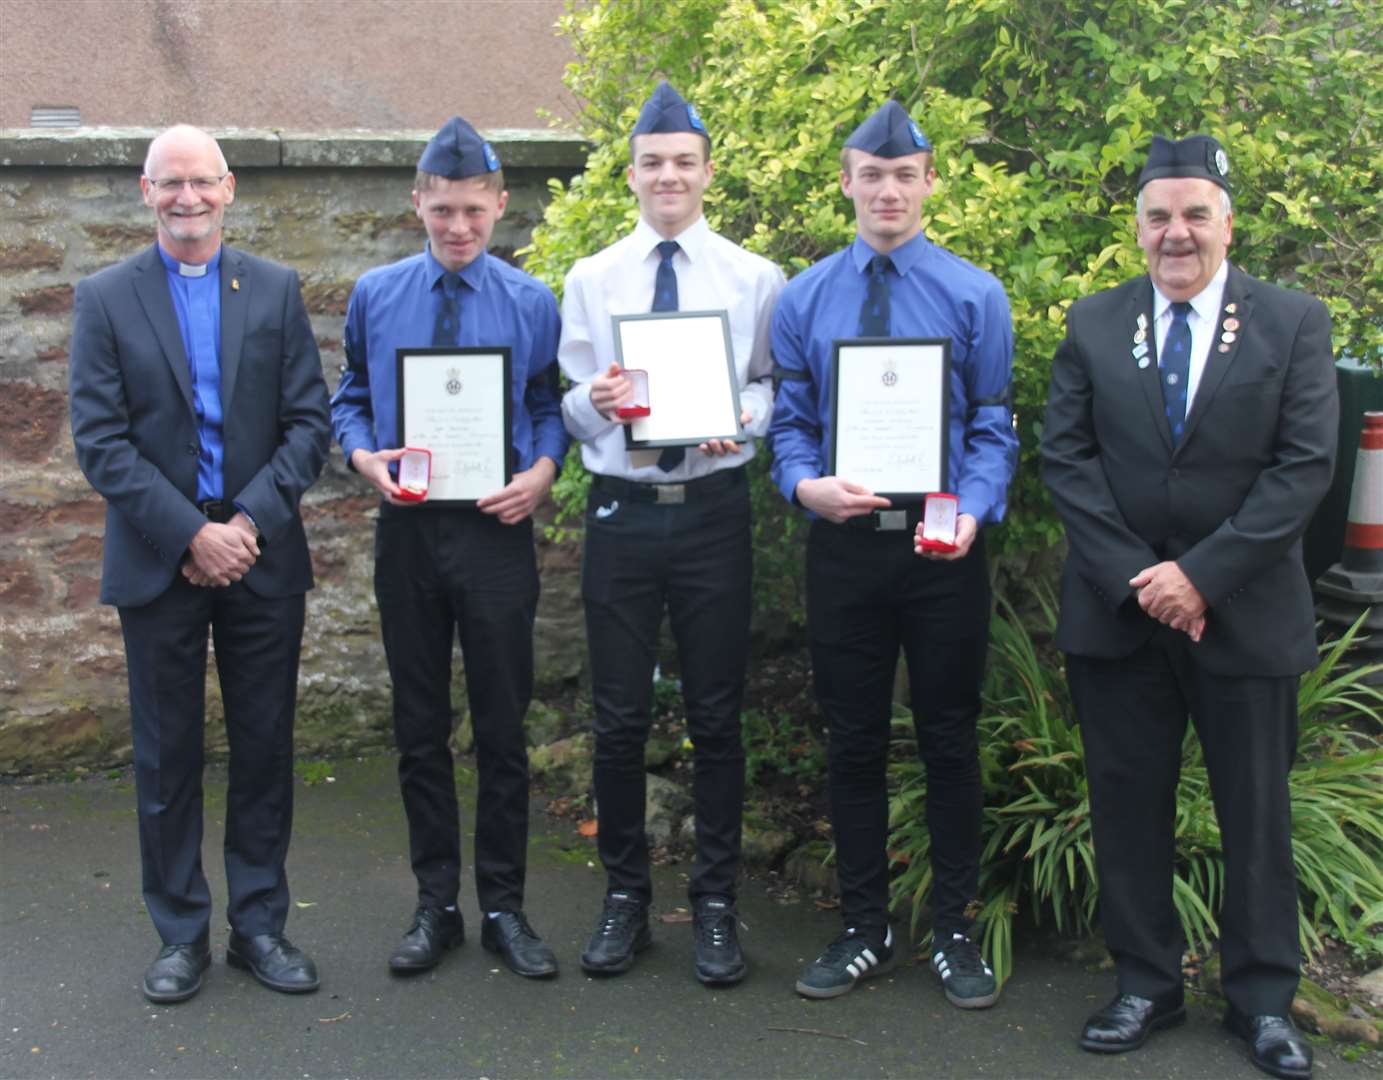 Receiving their awards on Sunday were Kyle Barclay, Colin Bain and Callum Anderson. Picture: Kirsty Brown